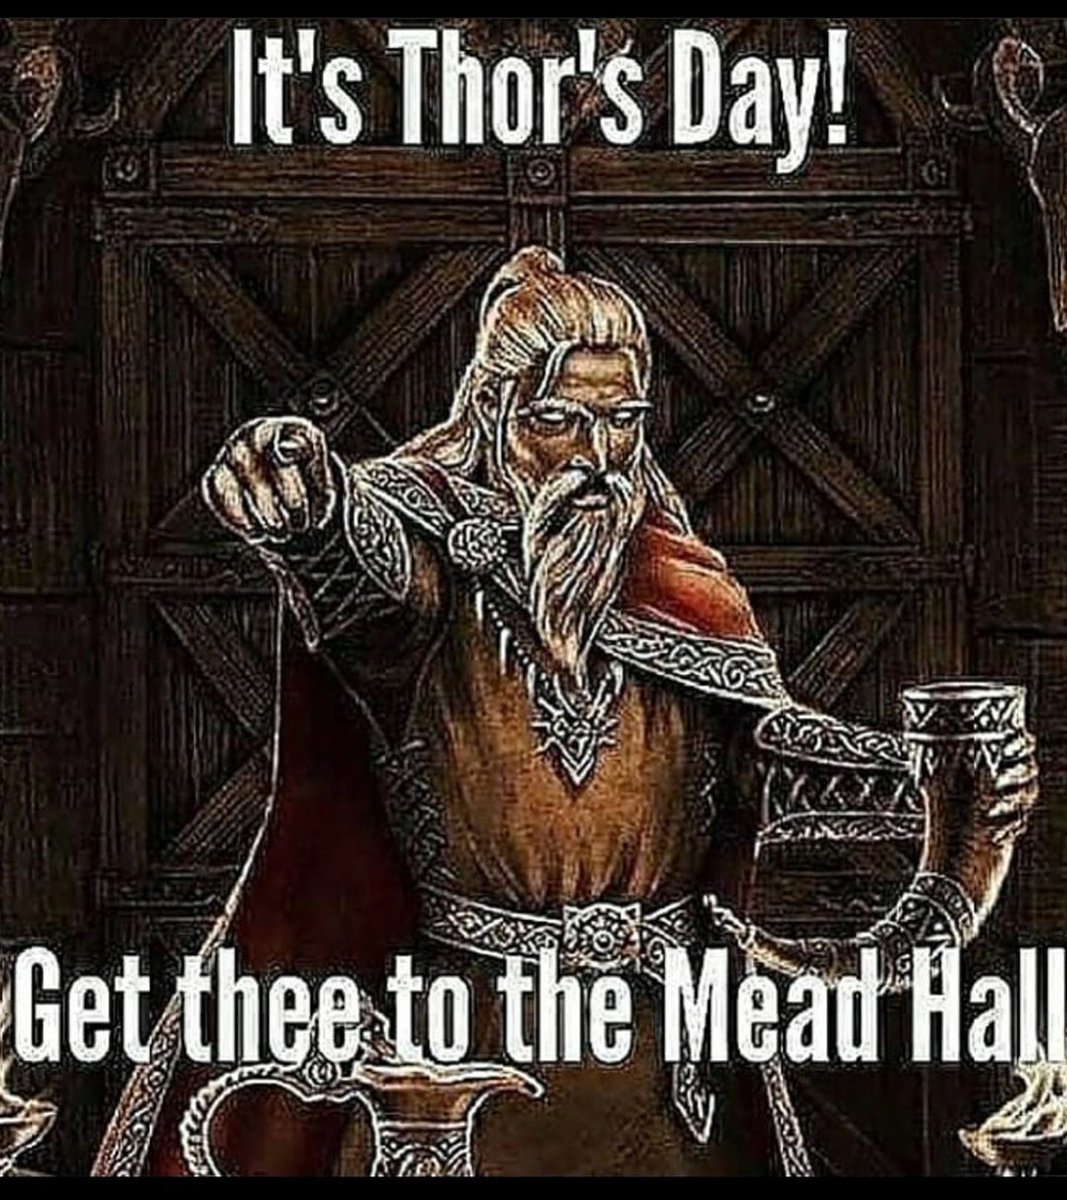 RT @YungShitgrinder: The FIRST Thor's day of 2022 is here!! https://t.co/1hBNdal76w